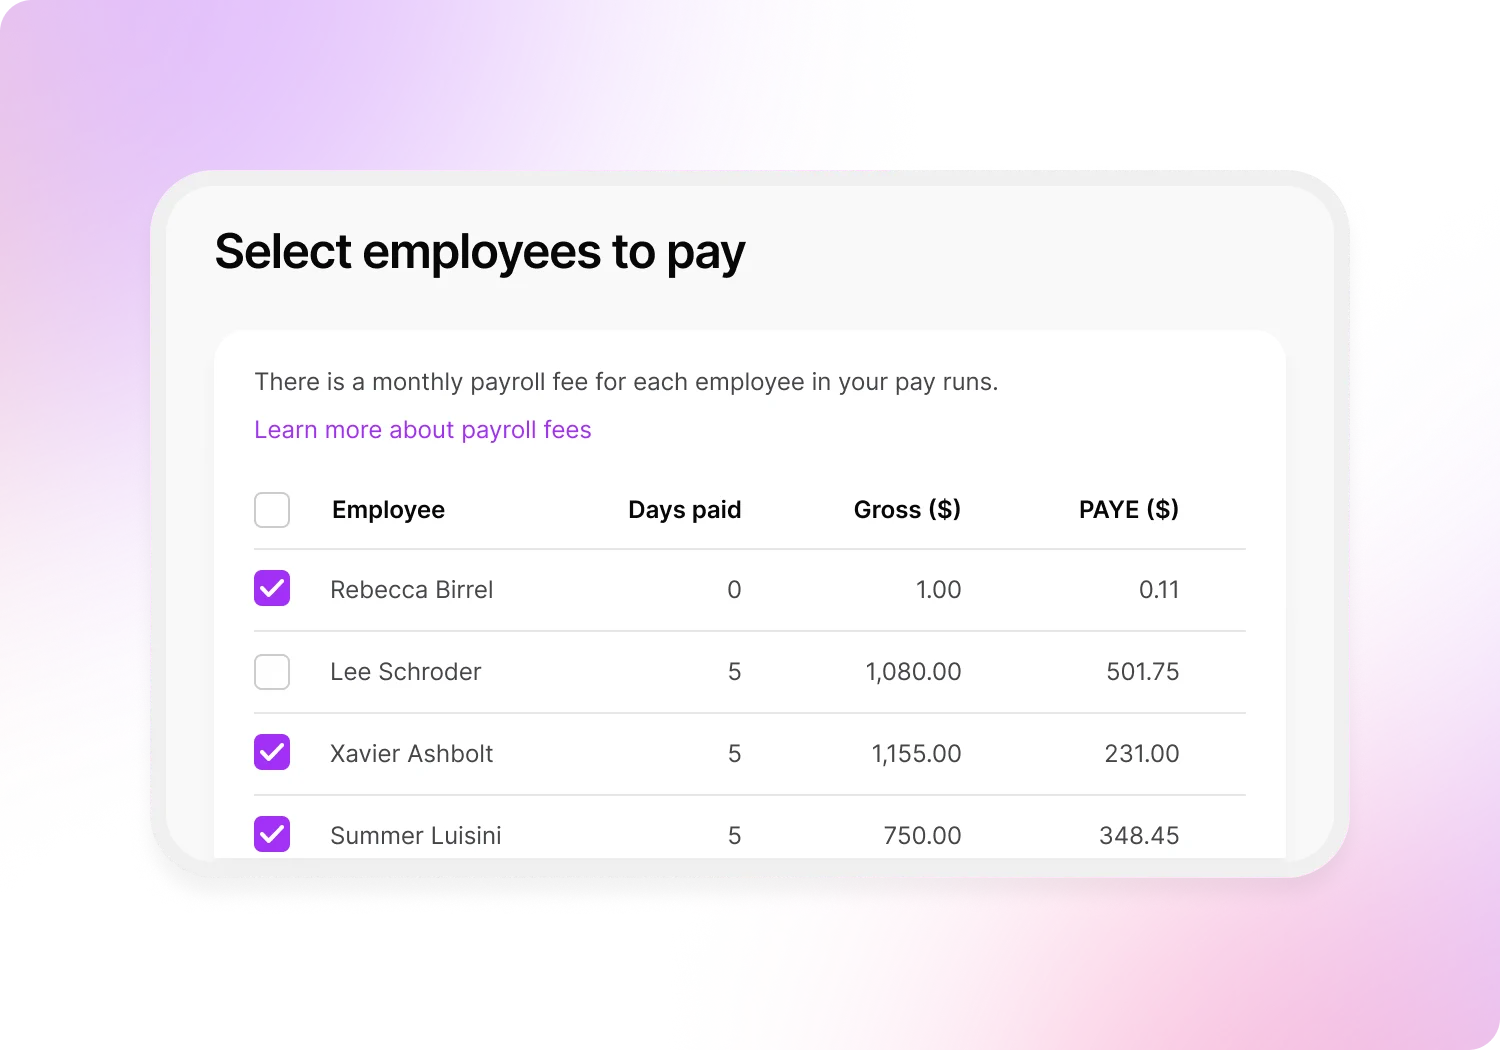 Click to select employees to pay 